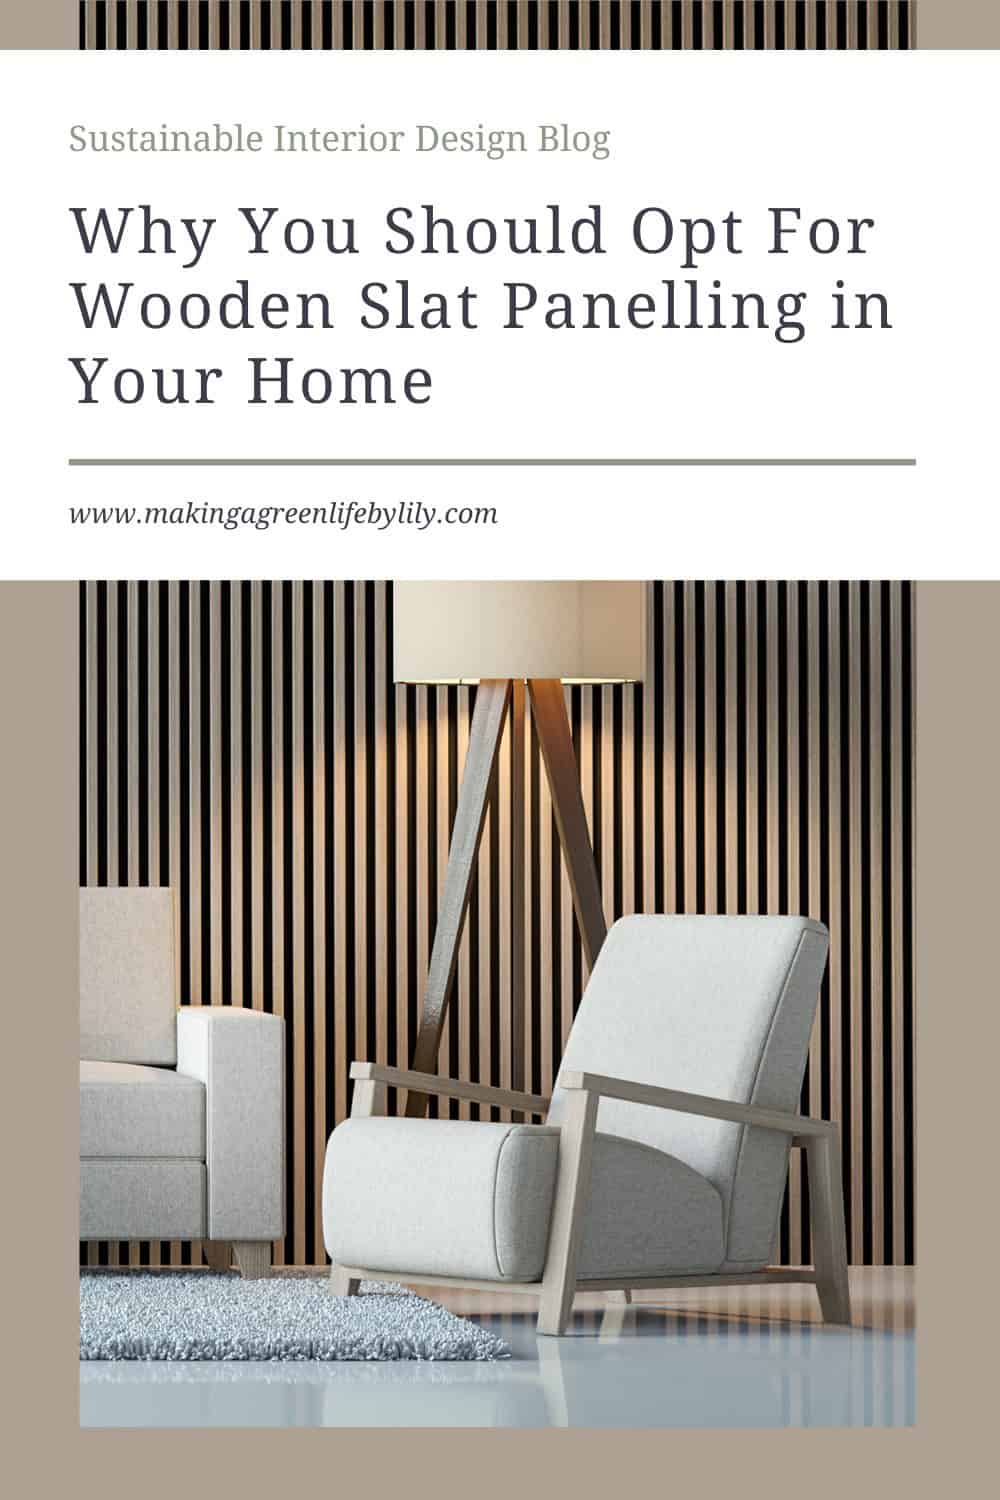 5 Benefits of Wooden Interior Wall Paneling — Wood & Co.